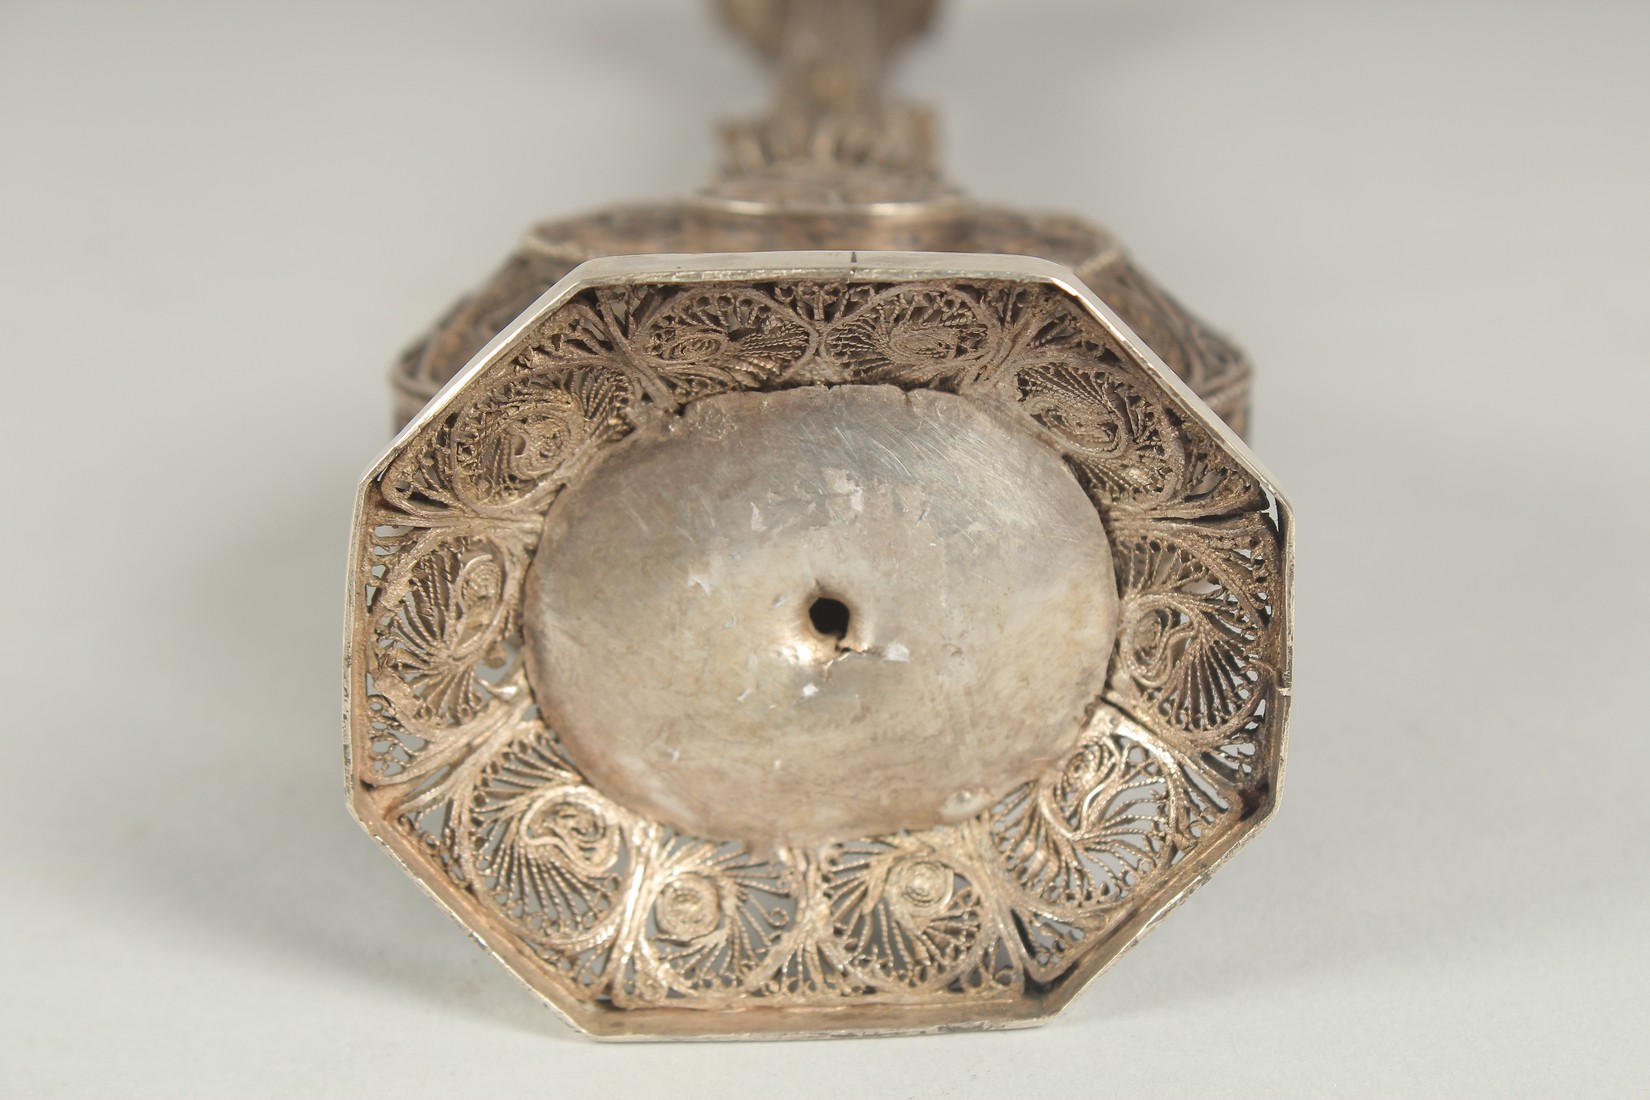 A FINE 19TH CENTURY INDIAN SILVER FILIGREE ROSEWATER SPRINKLER, 27cm high. - Image 9 of 10